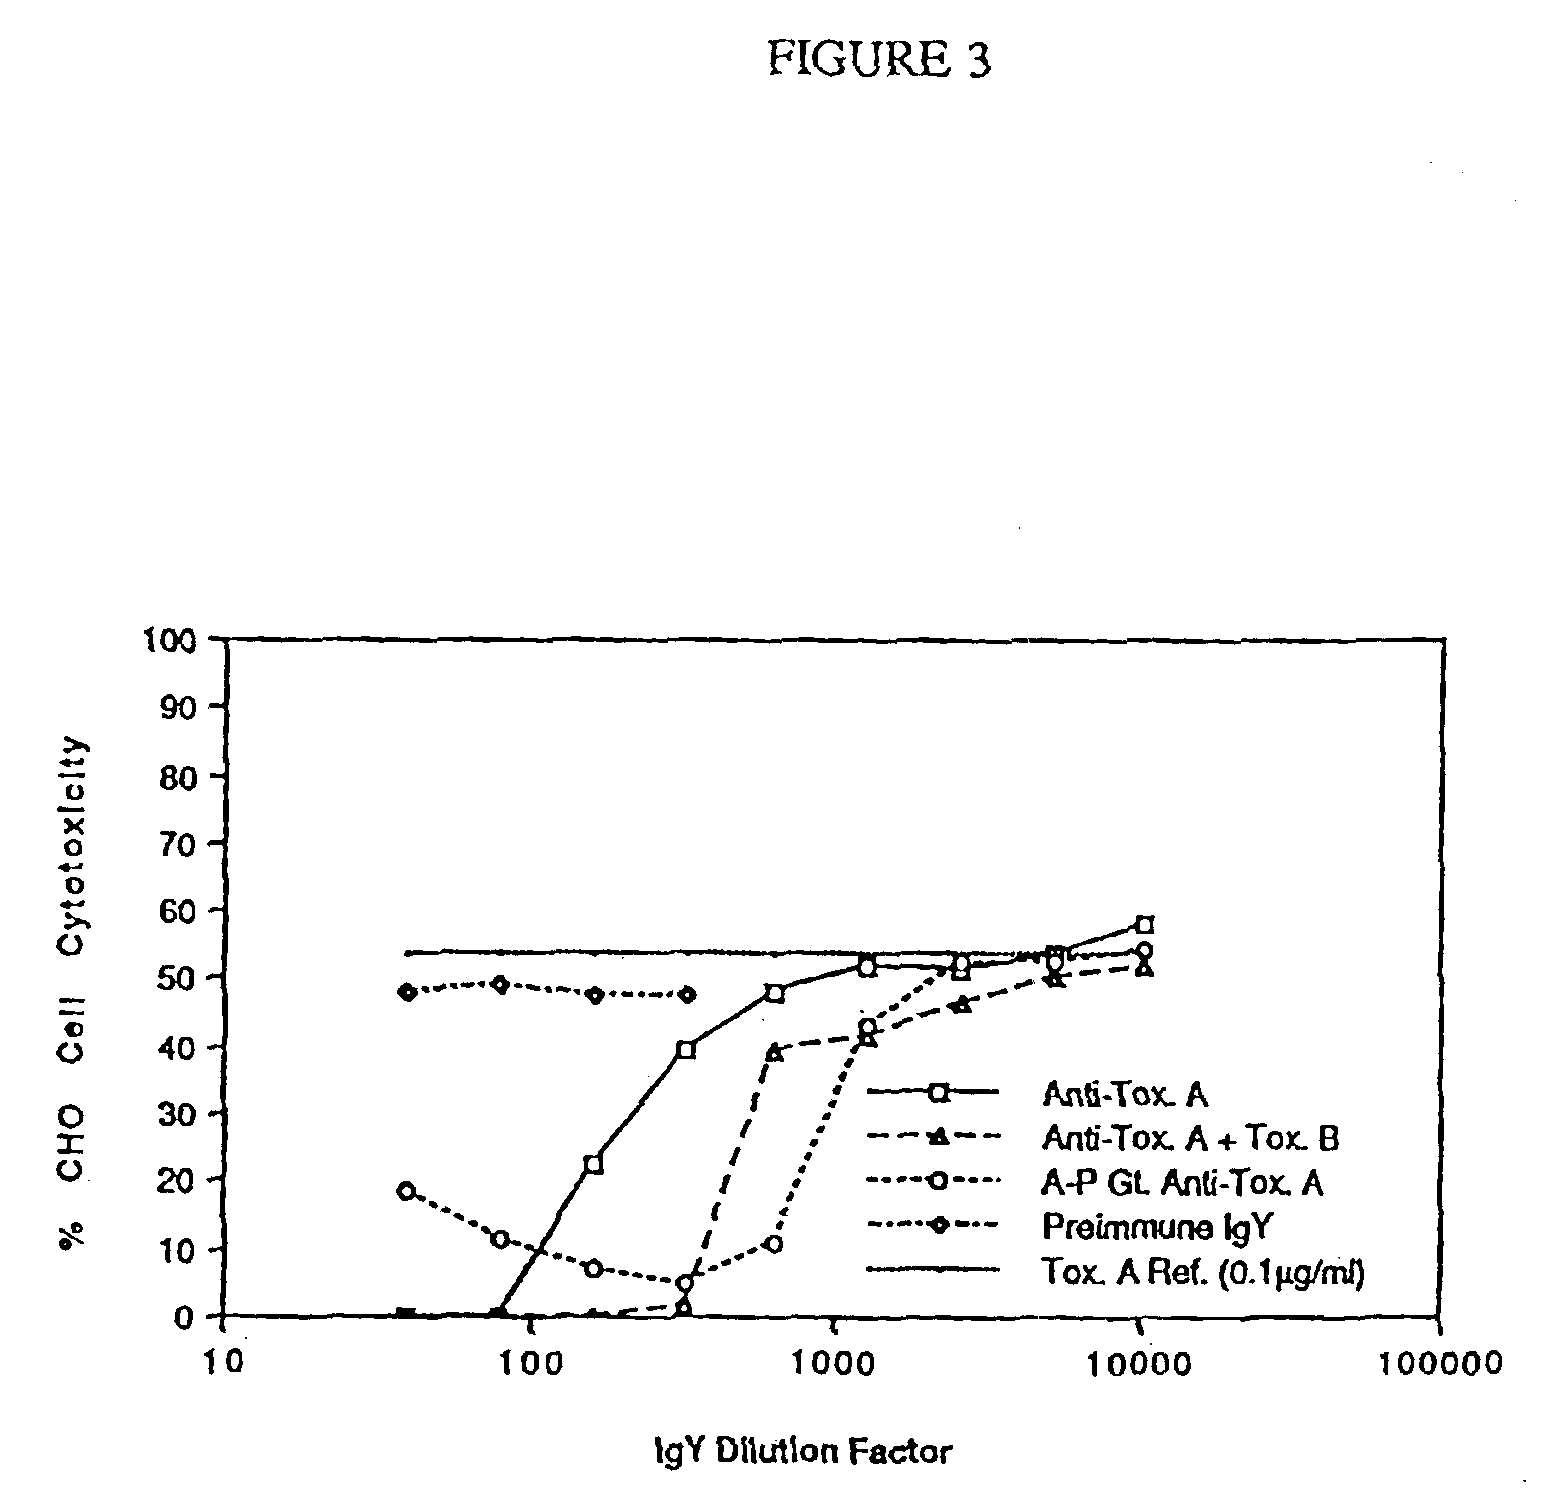 Soluble recombinant botulinum toxin proteins